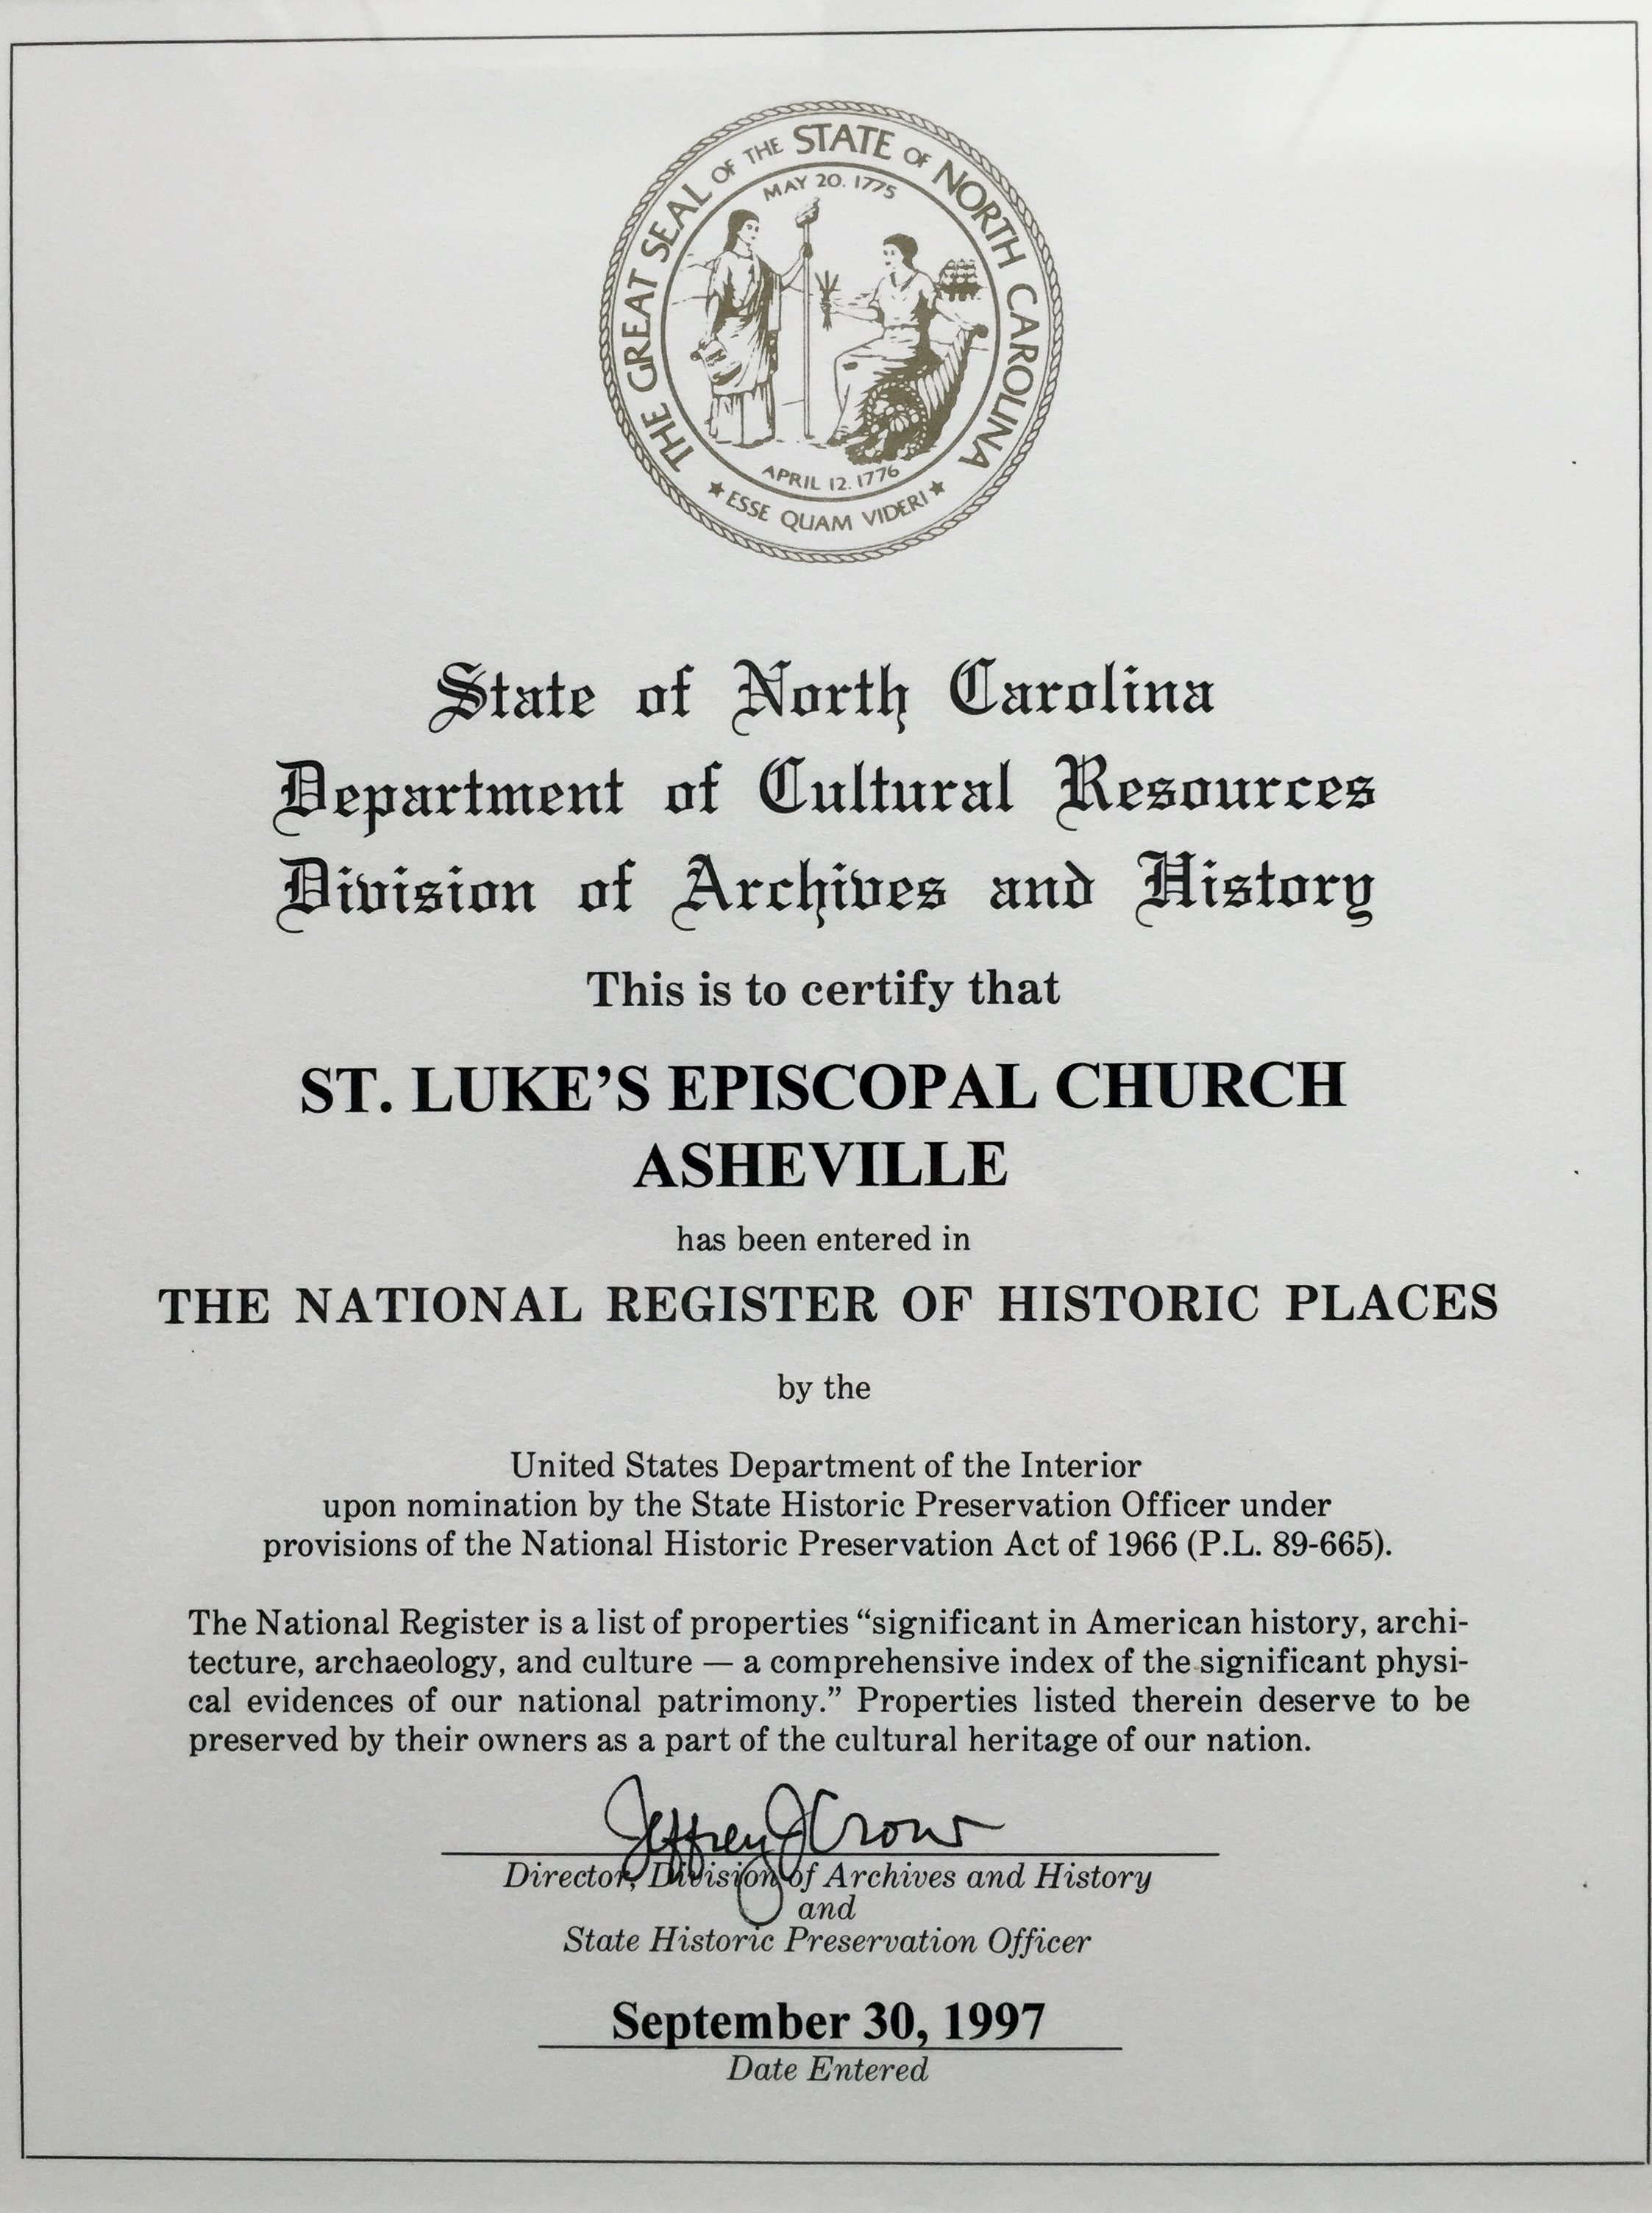 National Registry of Historic Places, 1997